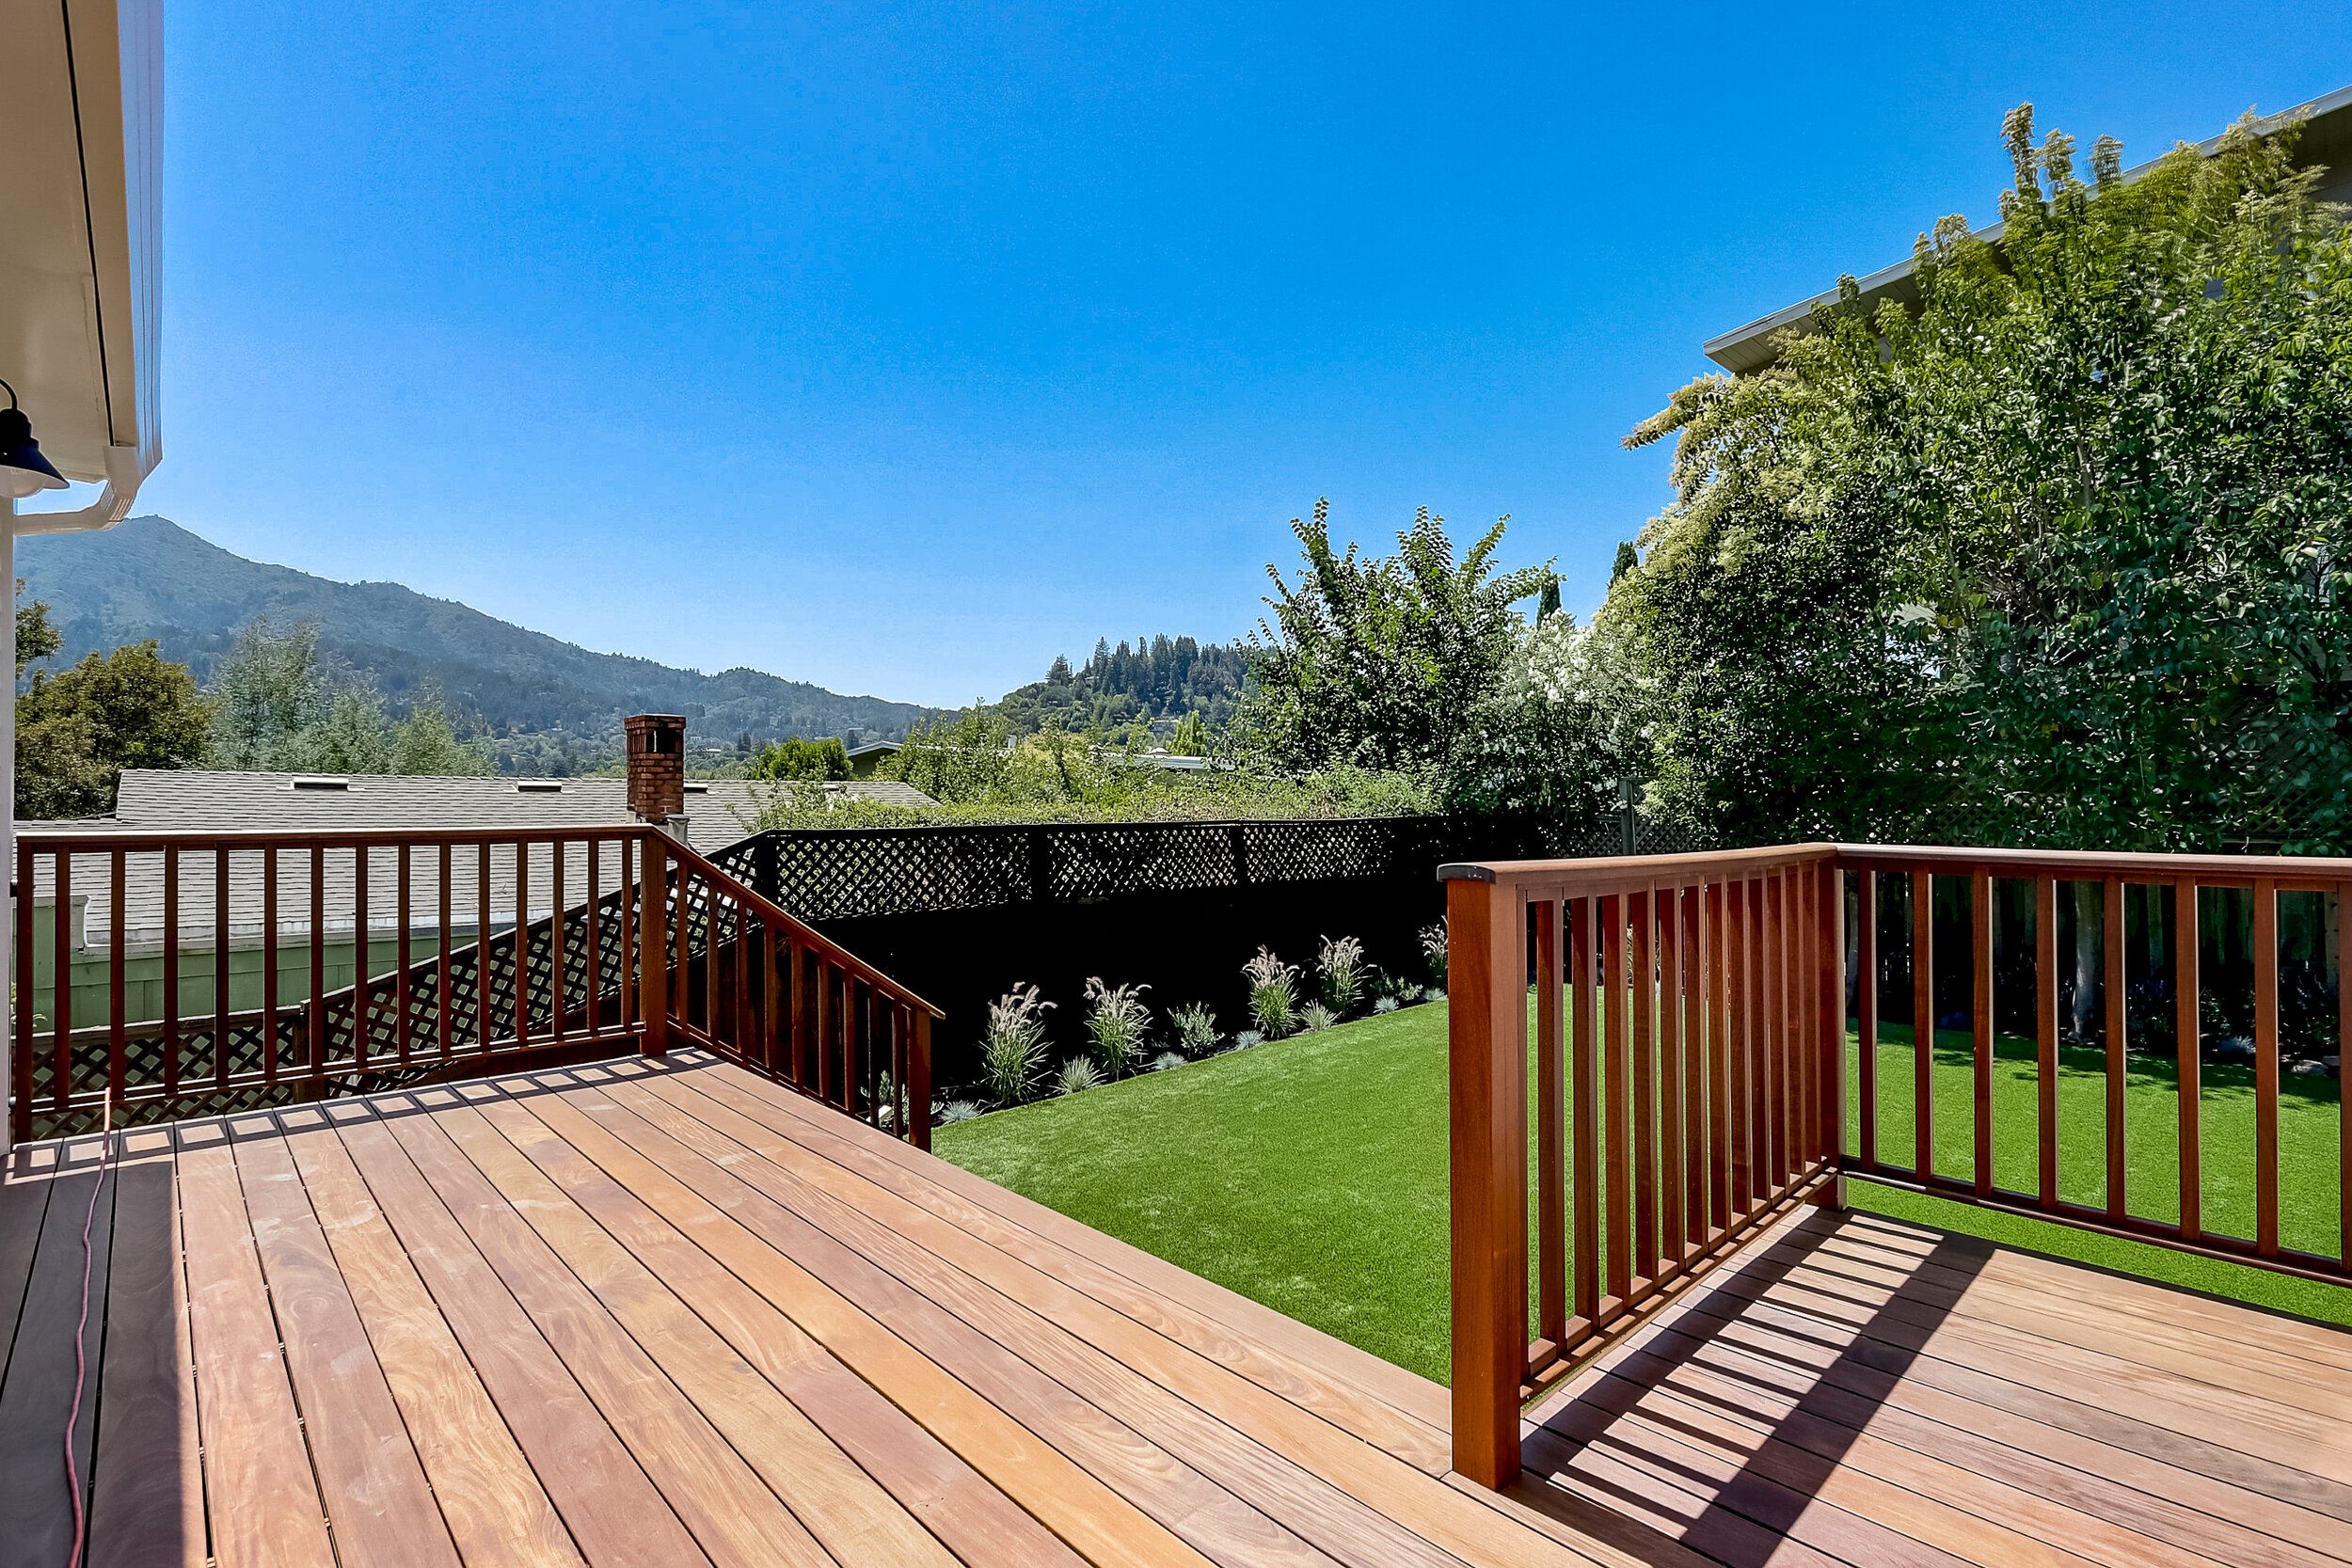 Own Marin Barr Haney Whitney Potter For Sale 9 Terrace Avenue, Kentfield California Marin County #1 Real Esate Agents-51.jpg